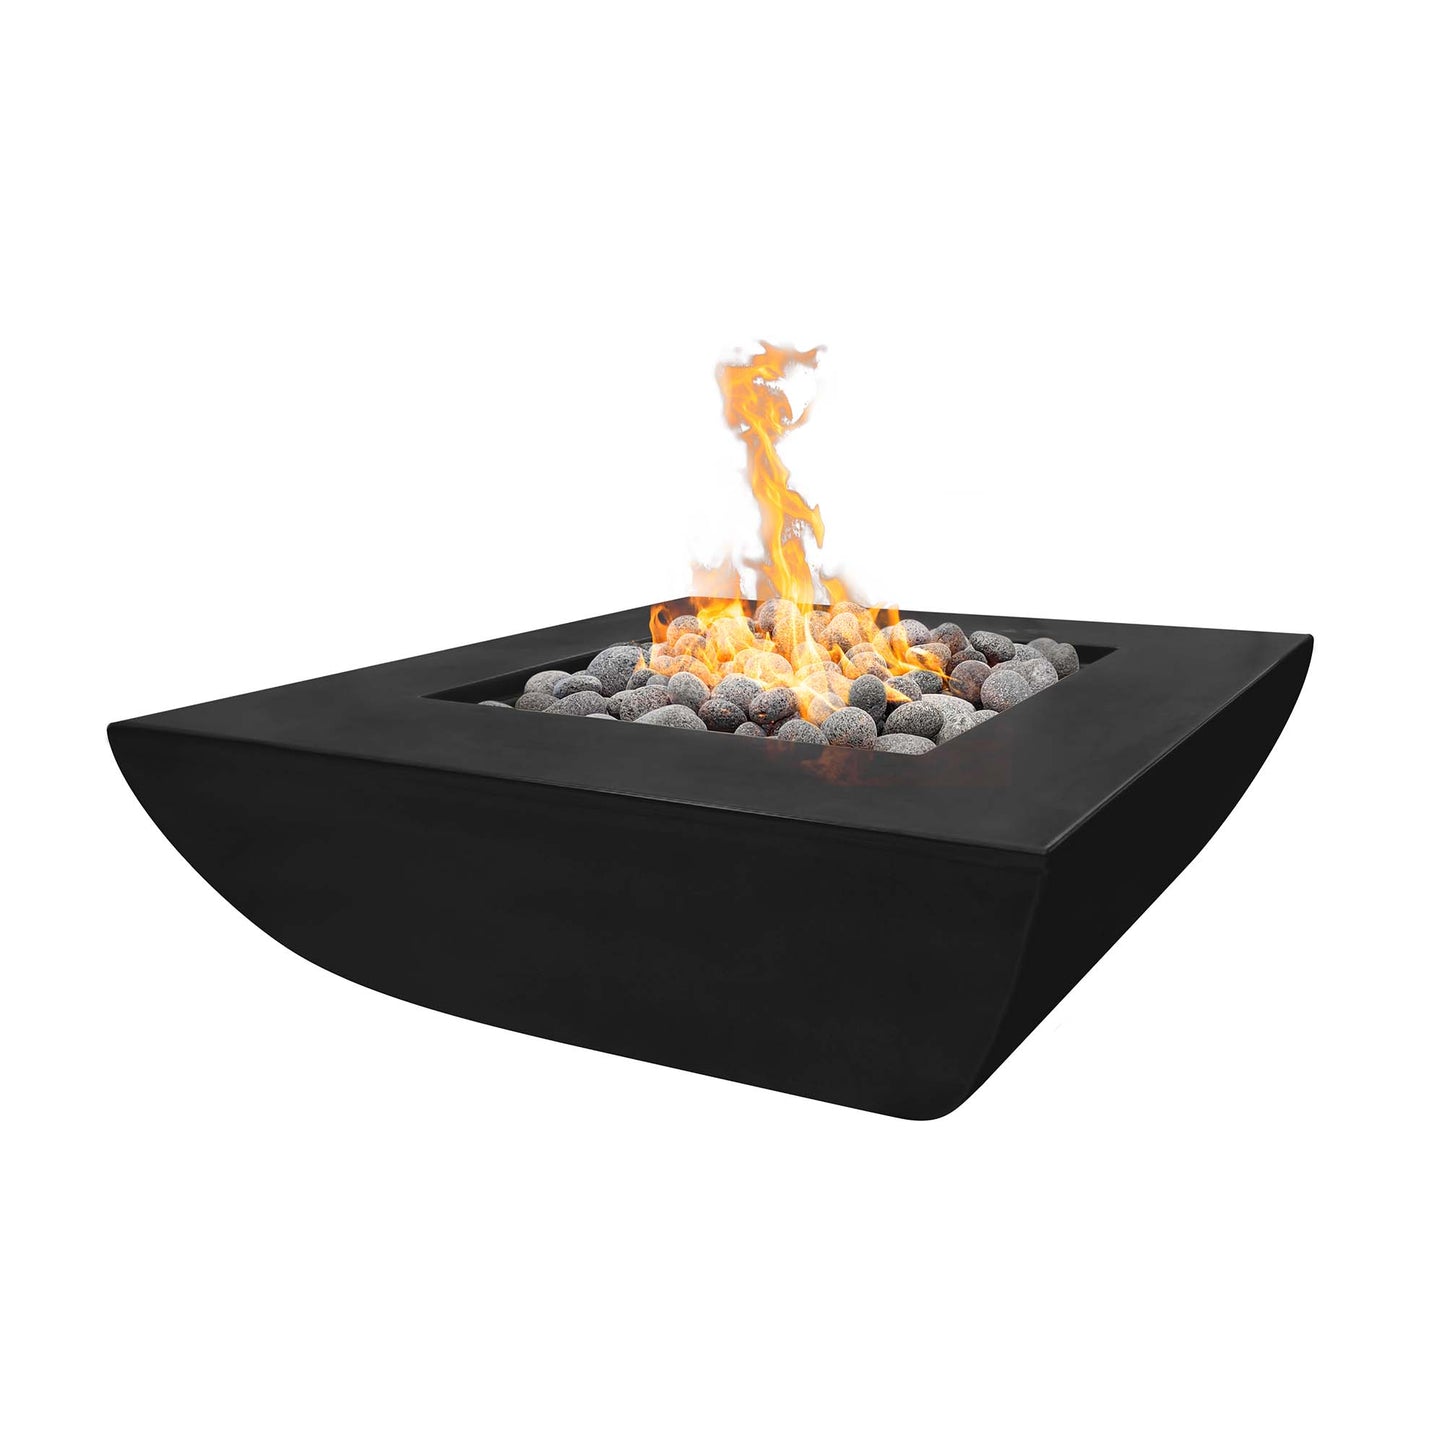 The Outdoor Plus Square Avalon 42" Metallic Pearl GFRC Concrete Natural Gas Fire Pit with 110V Electronic Ignition